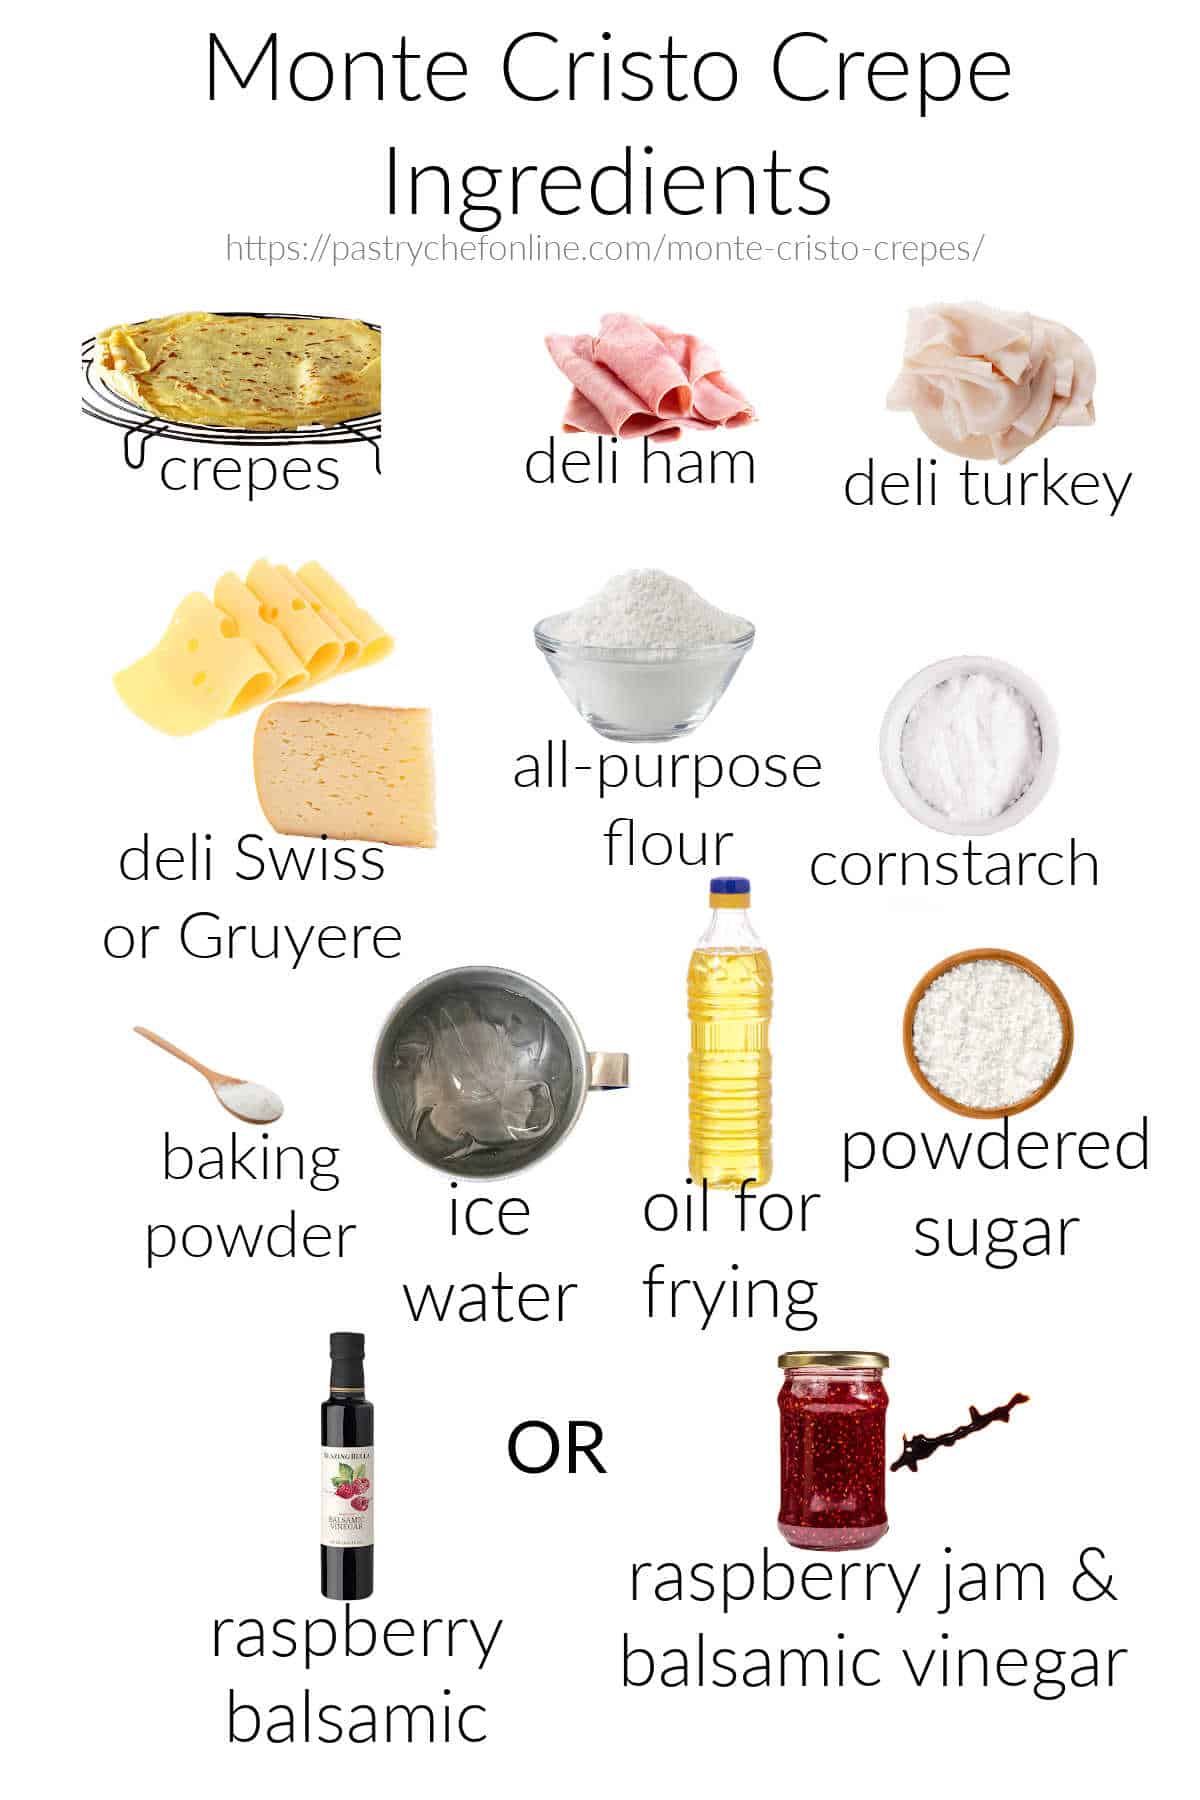 all the ingredients needed to make, fry, and serve Monte Cristo crepes, labeled and on a white background.